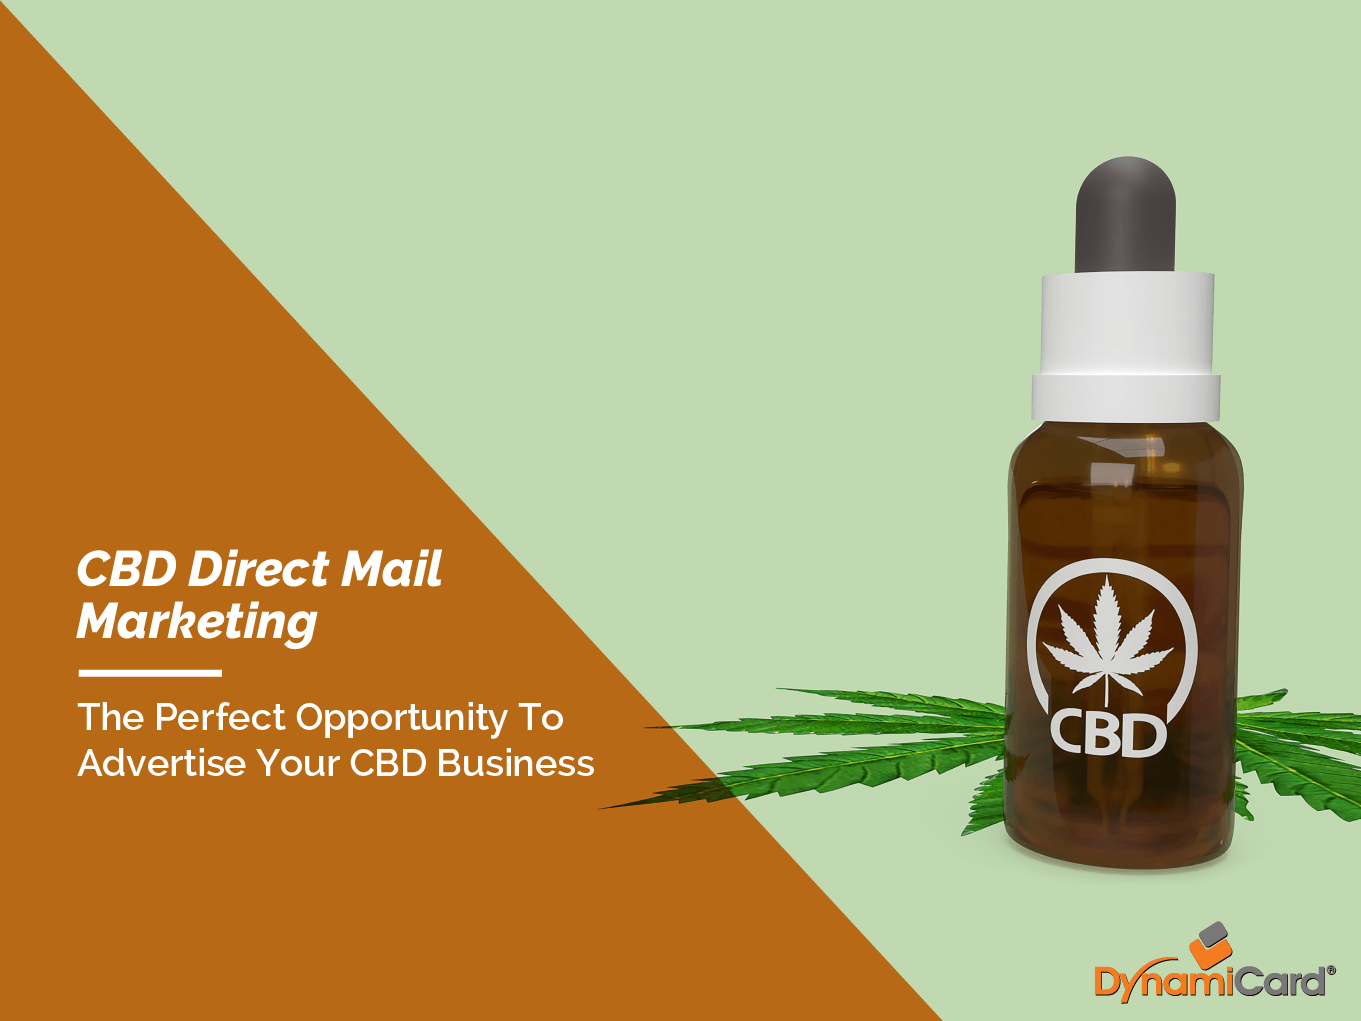 How to Market Your CBD Business